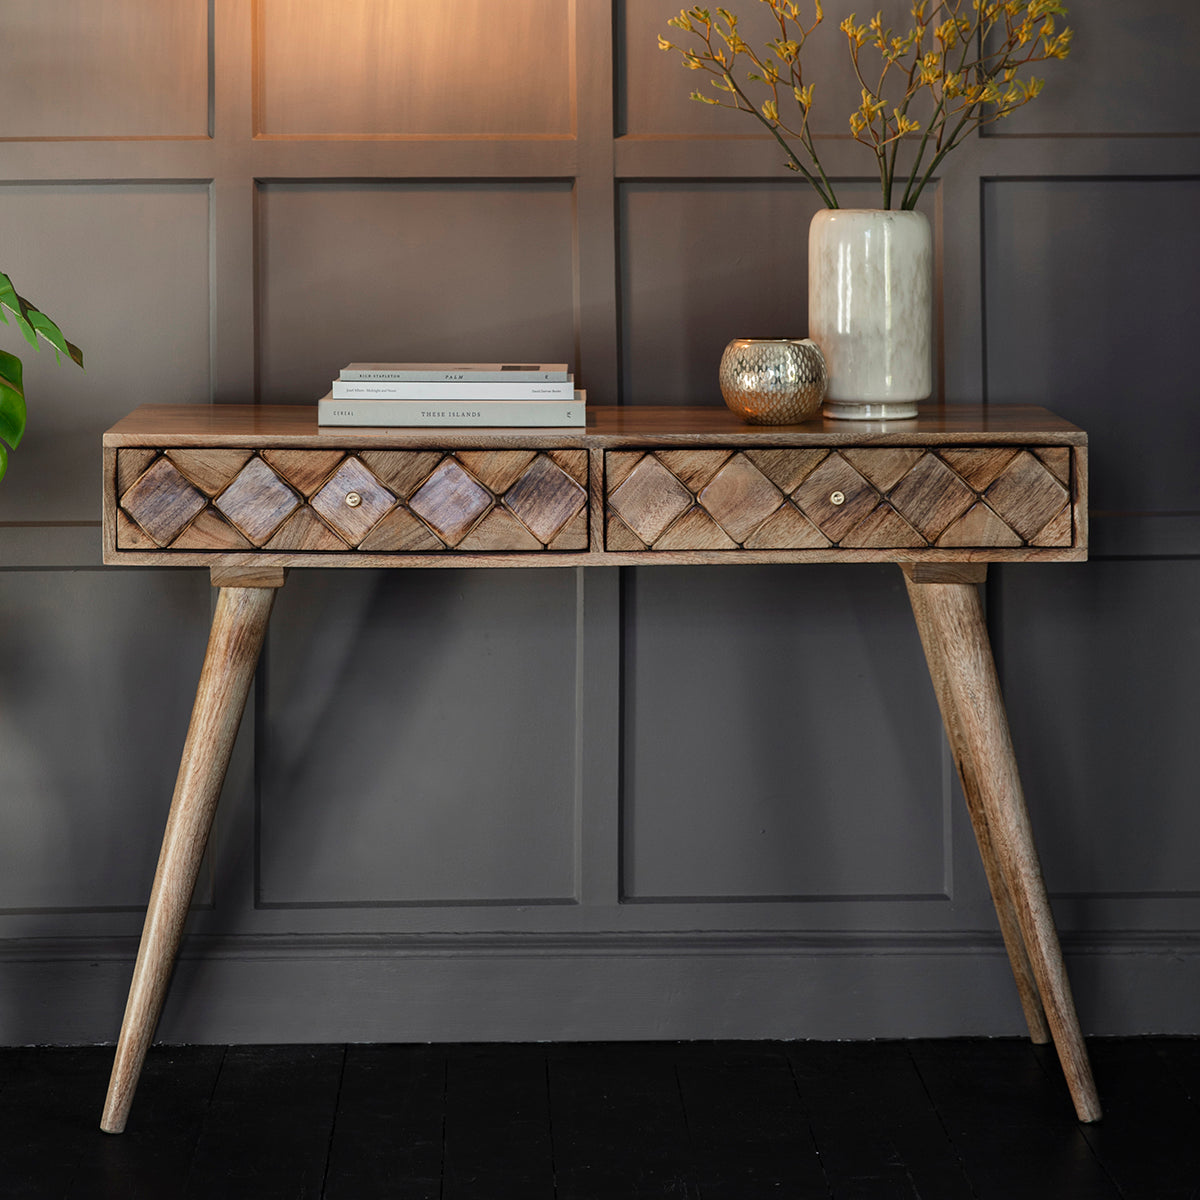 A Tuscany Console Table by Kikiathome.co.uk in front of a wall, adding interior decor to the home furniture.